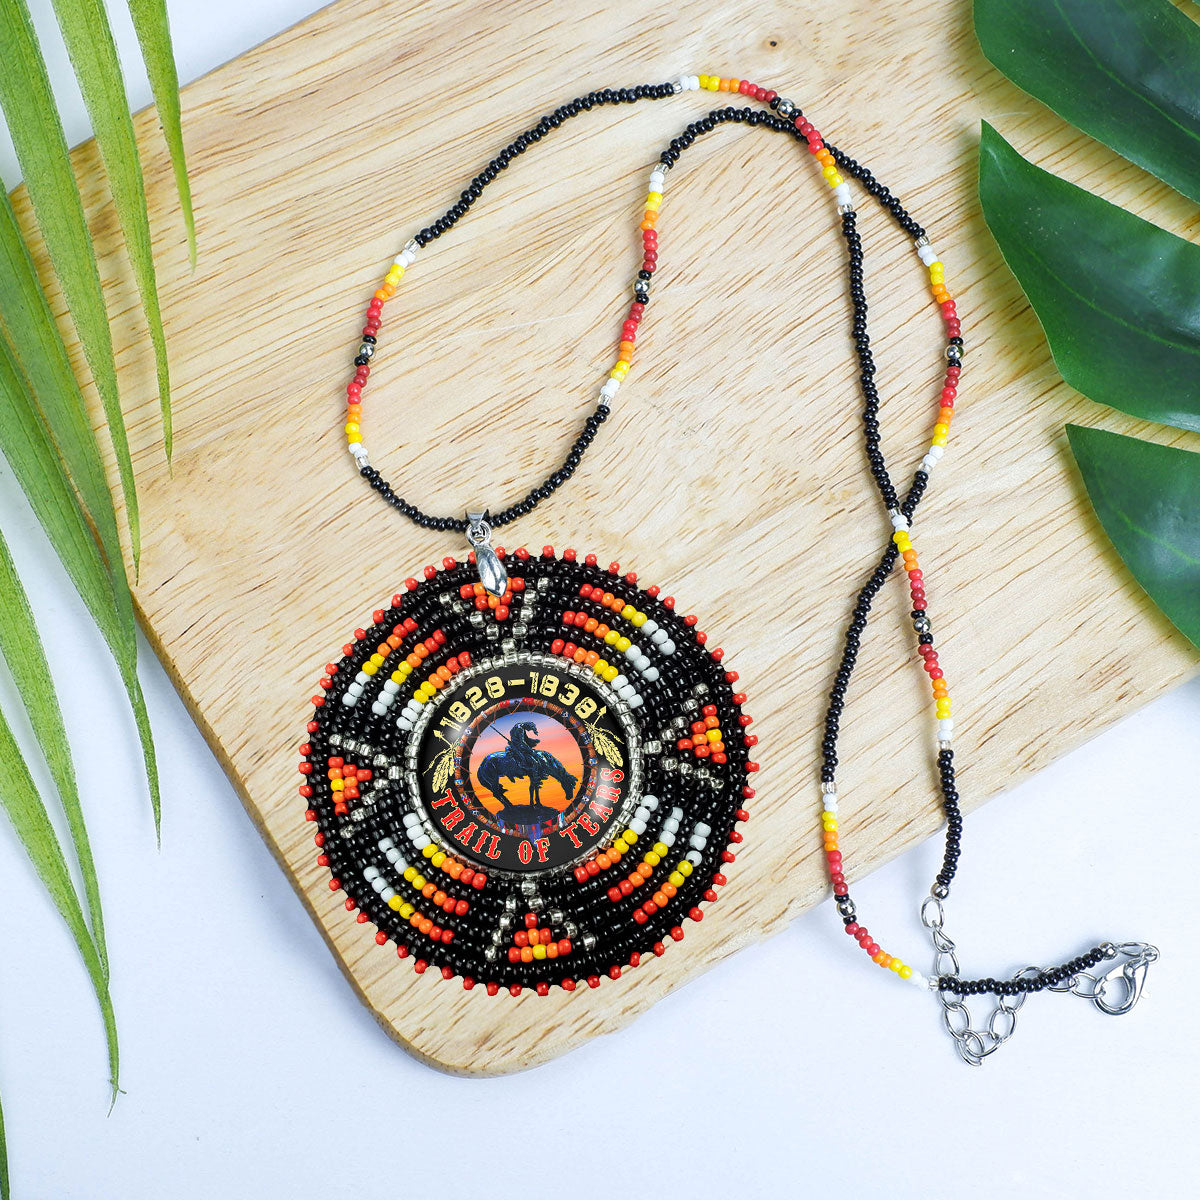 SALE 50% OFF - Trail of Tears Beaded Sunburst Handmade Beaded Wire Necklace PendantUnisex With Native American Style